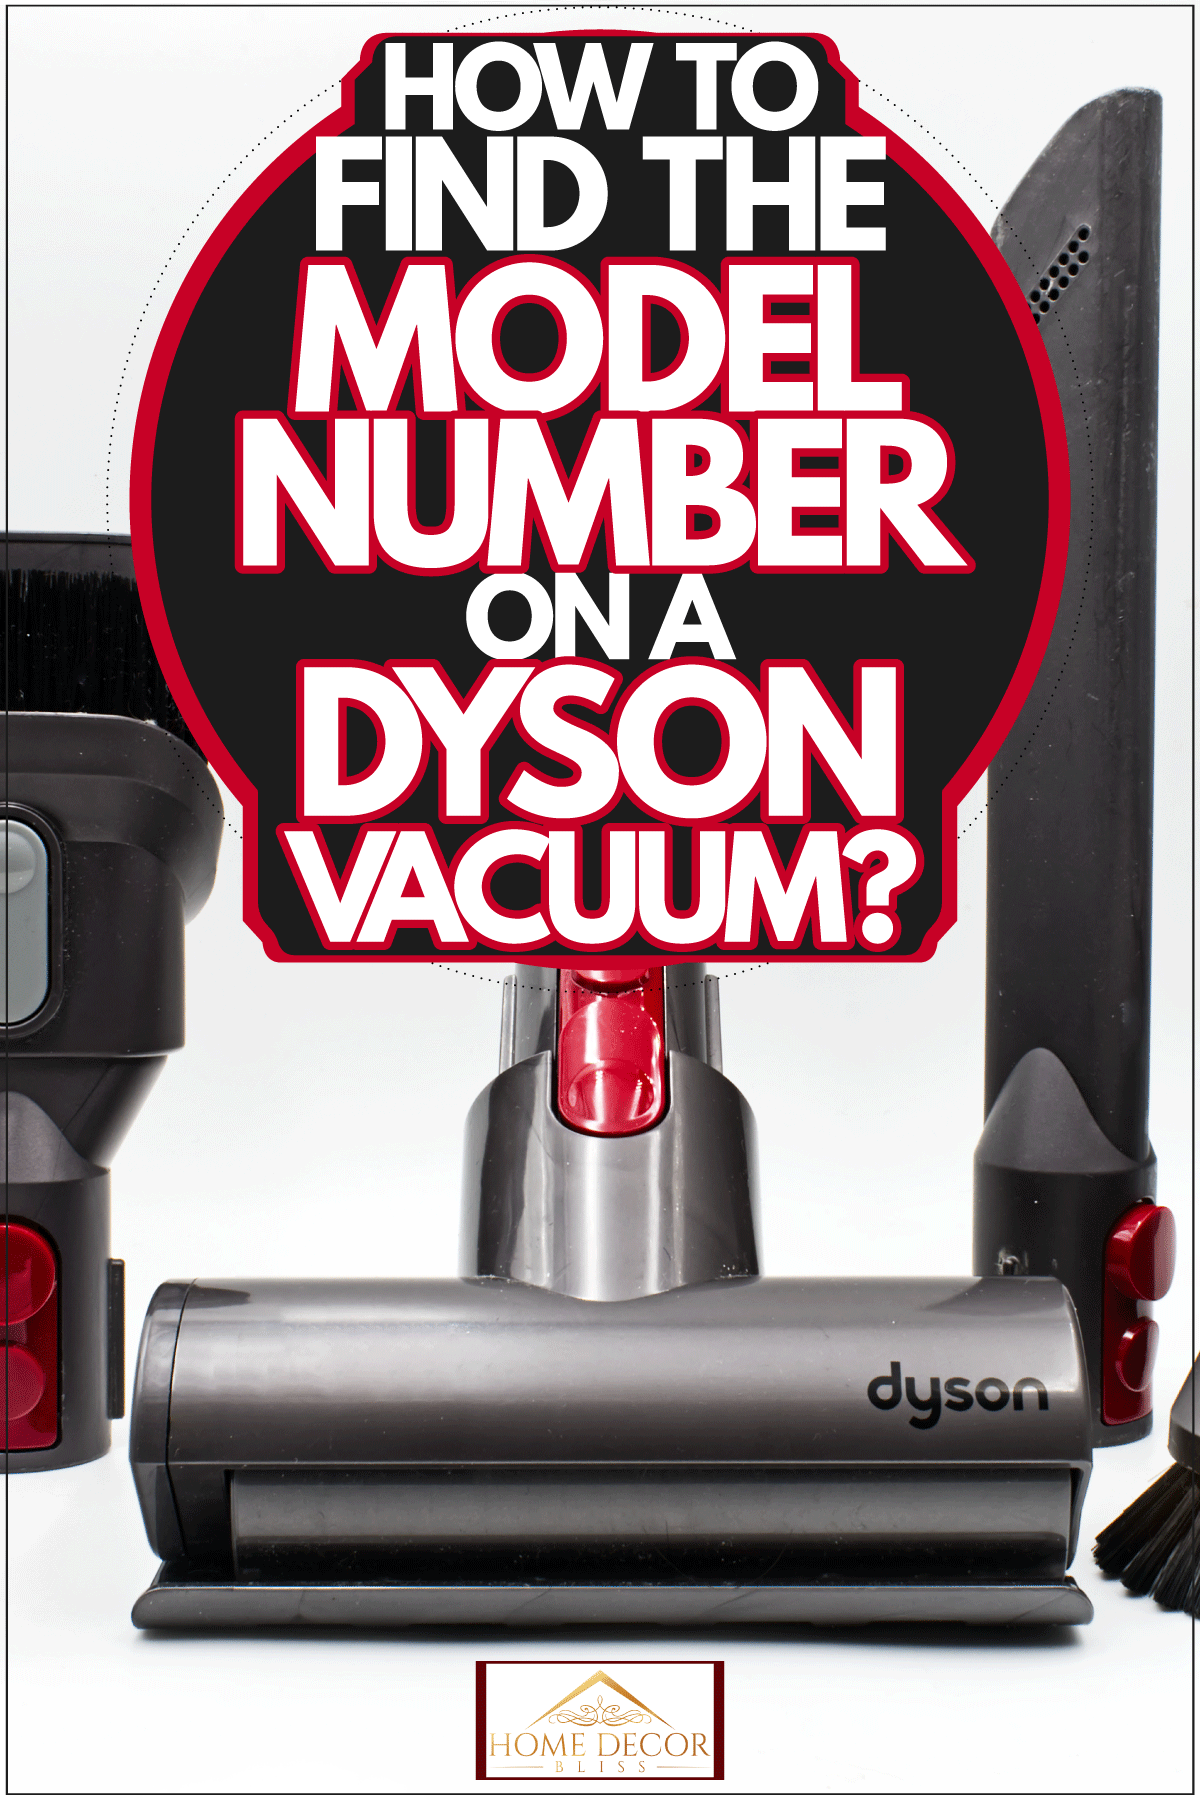 A disassembled Dyson vacuum, How To Find The Model Number On A Dyson Vacuum